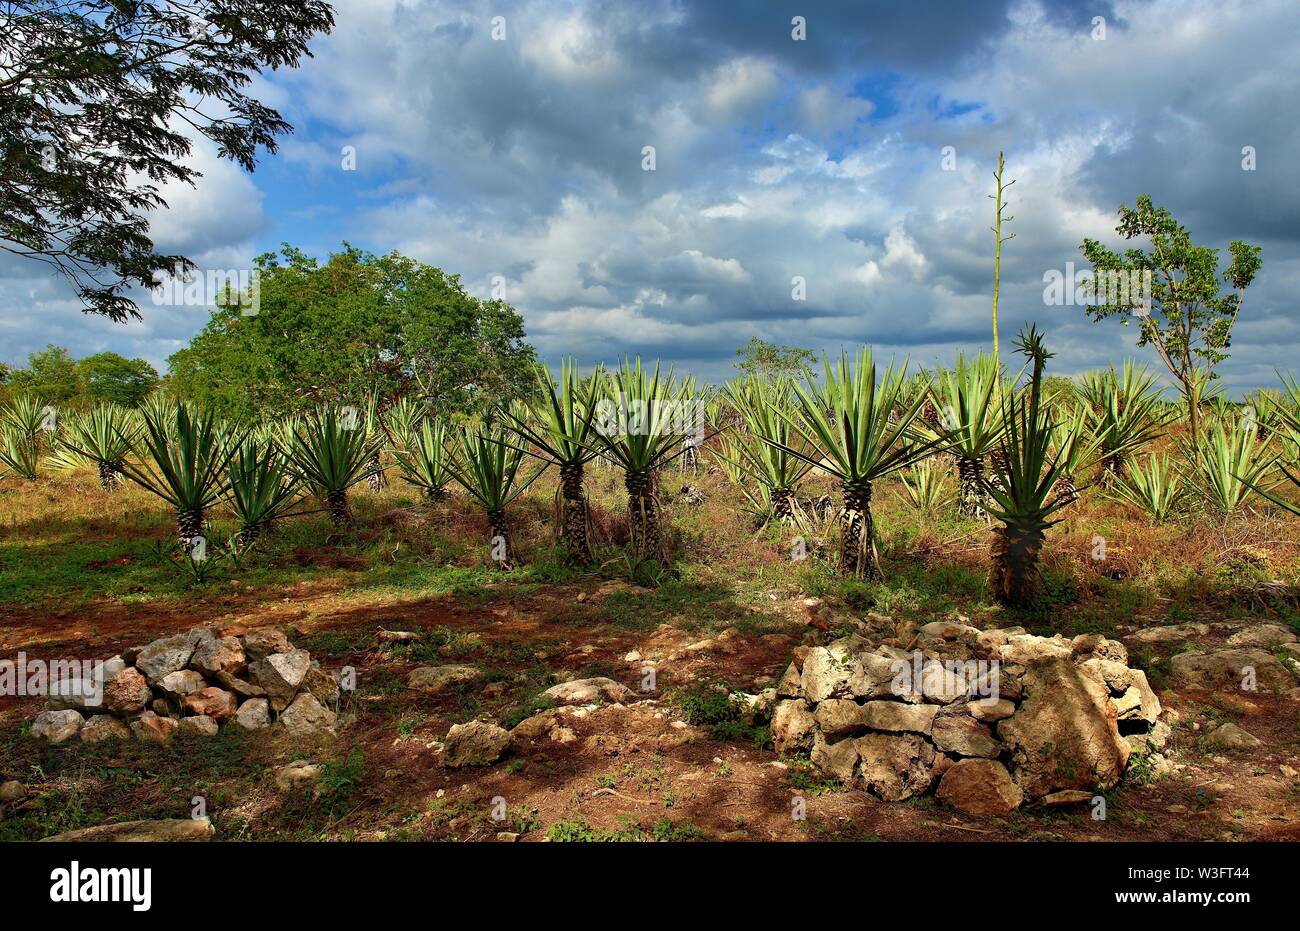 Agave field under a cloudy sky on Yucatan peninsula Stock Photo